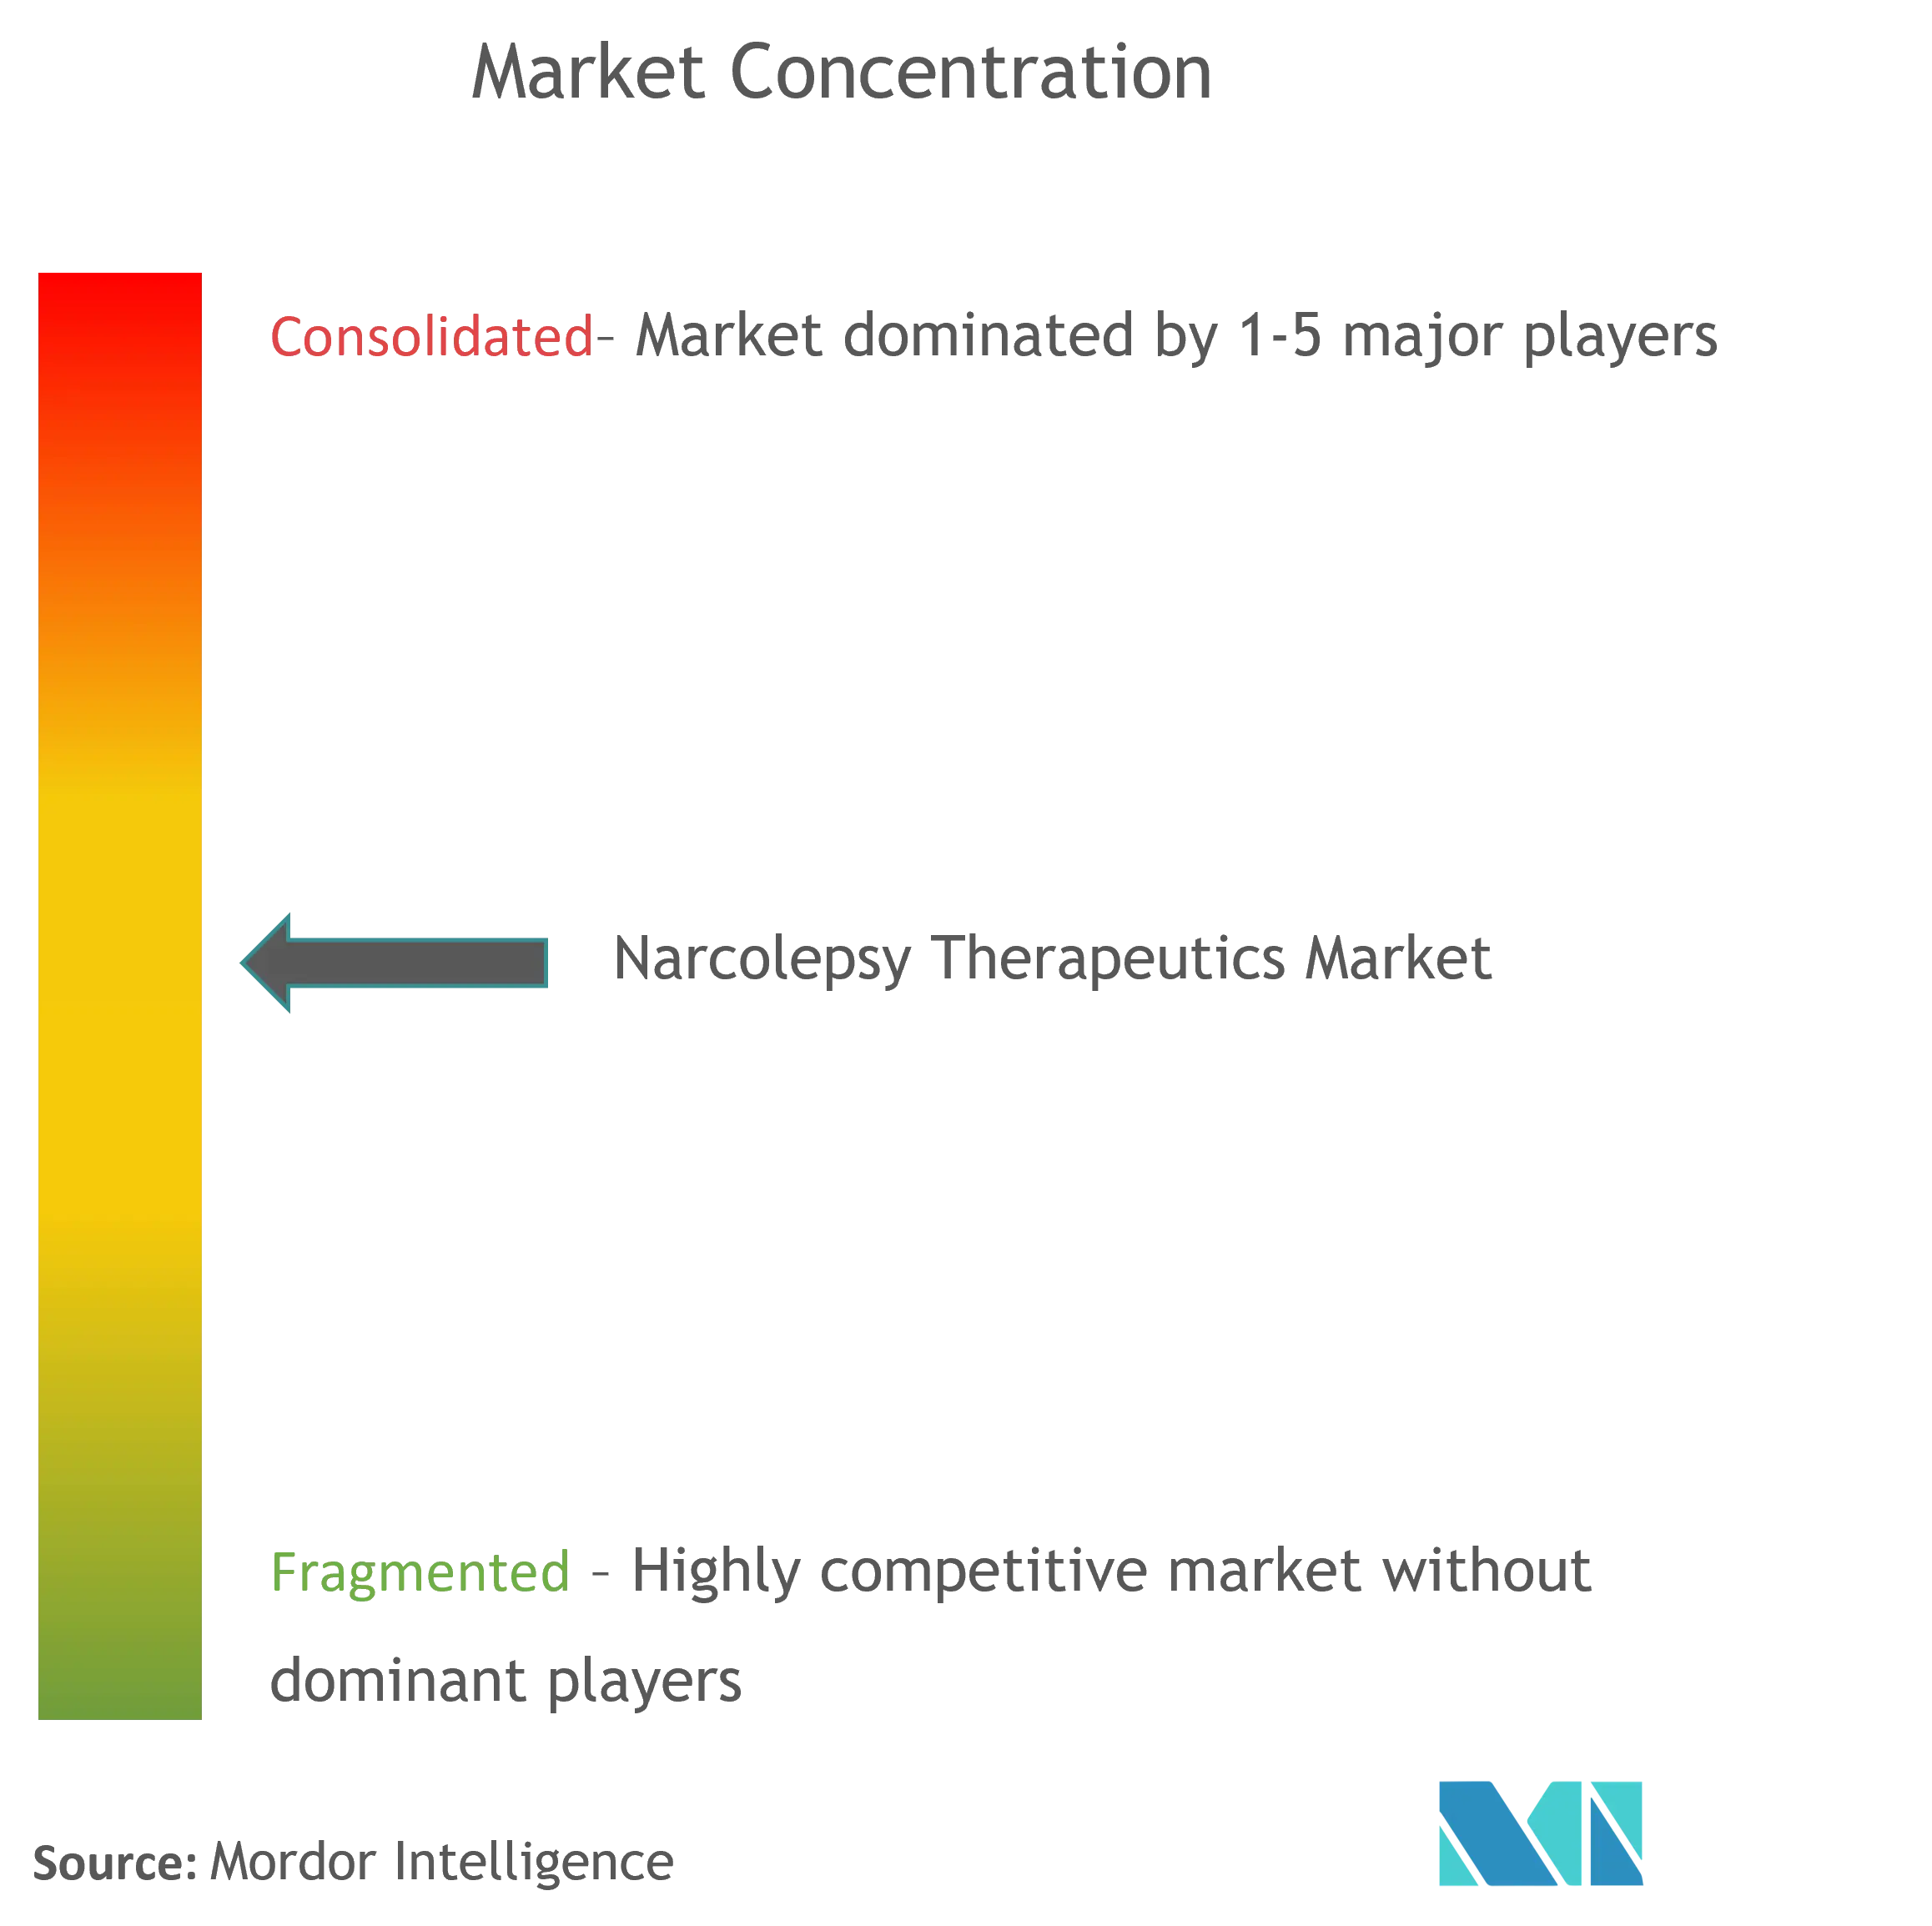 Narcolepsy Therapeutics Market Concentration